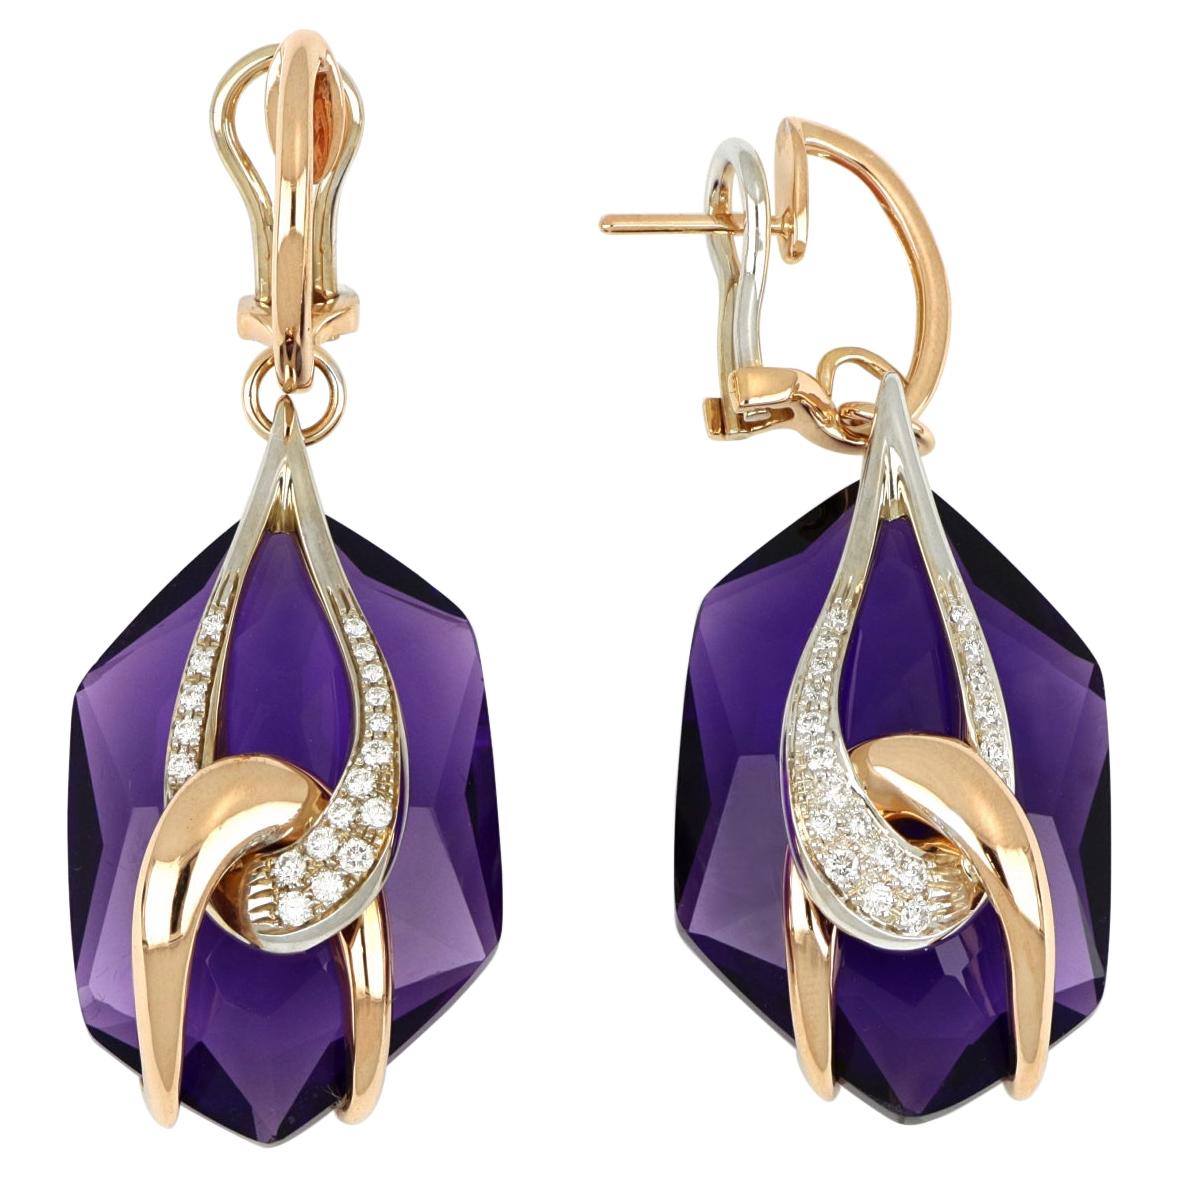 18kt Rose and White Gold Moon Chain Earrings with Amethyst and Diamonds